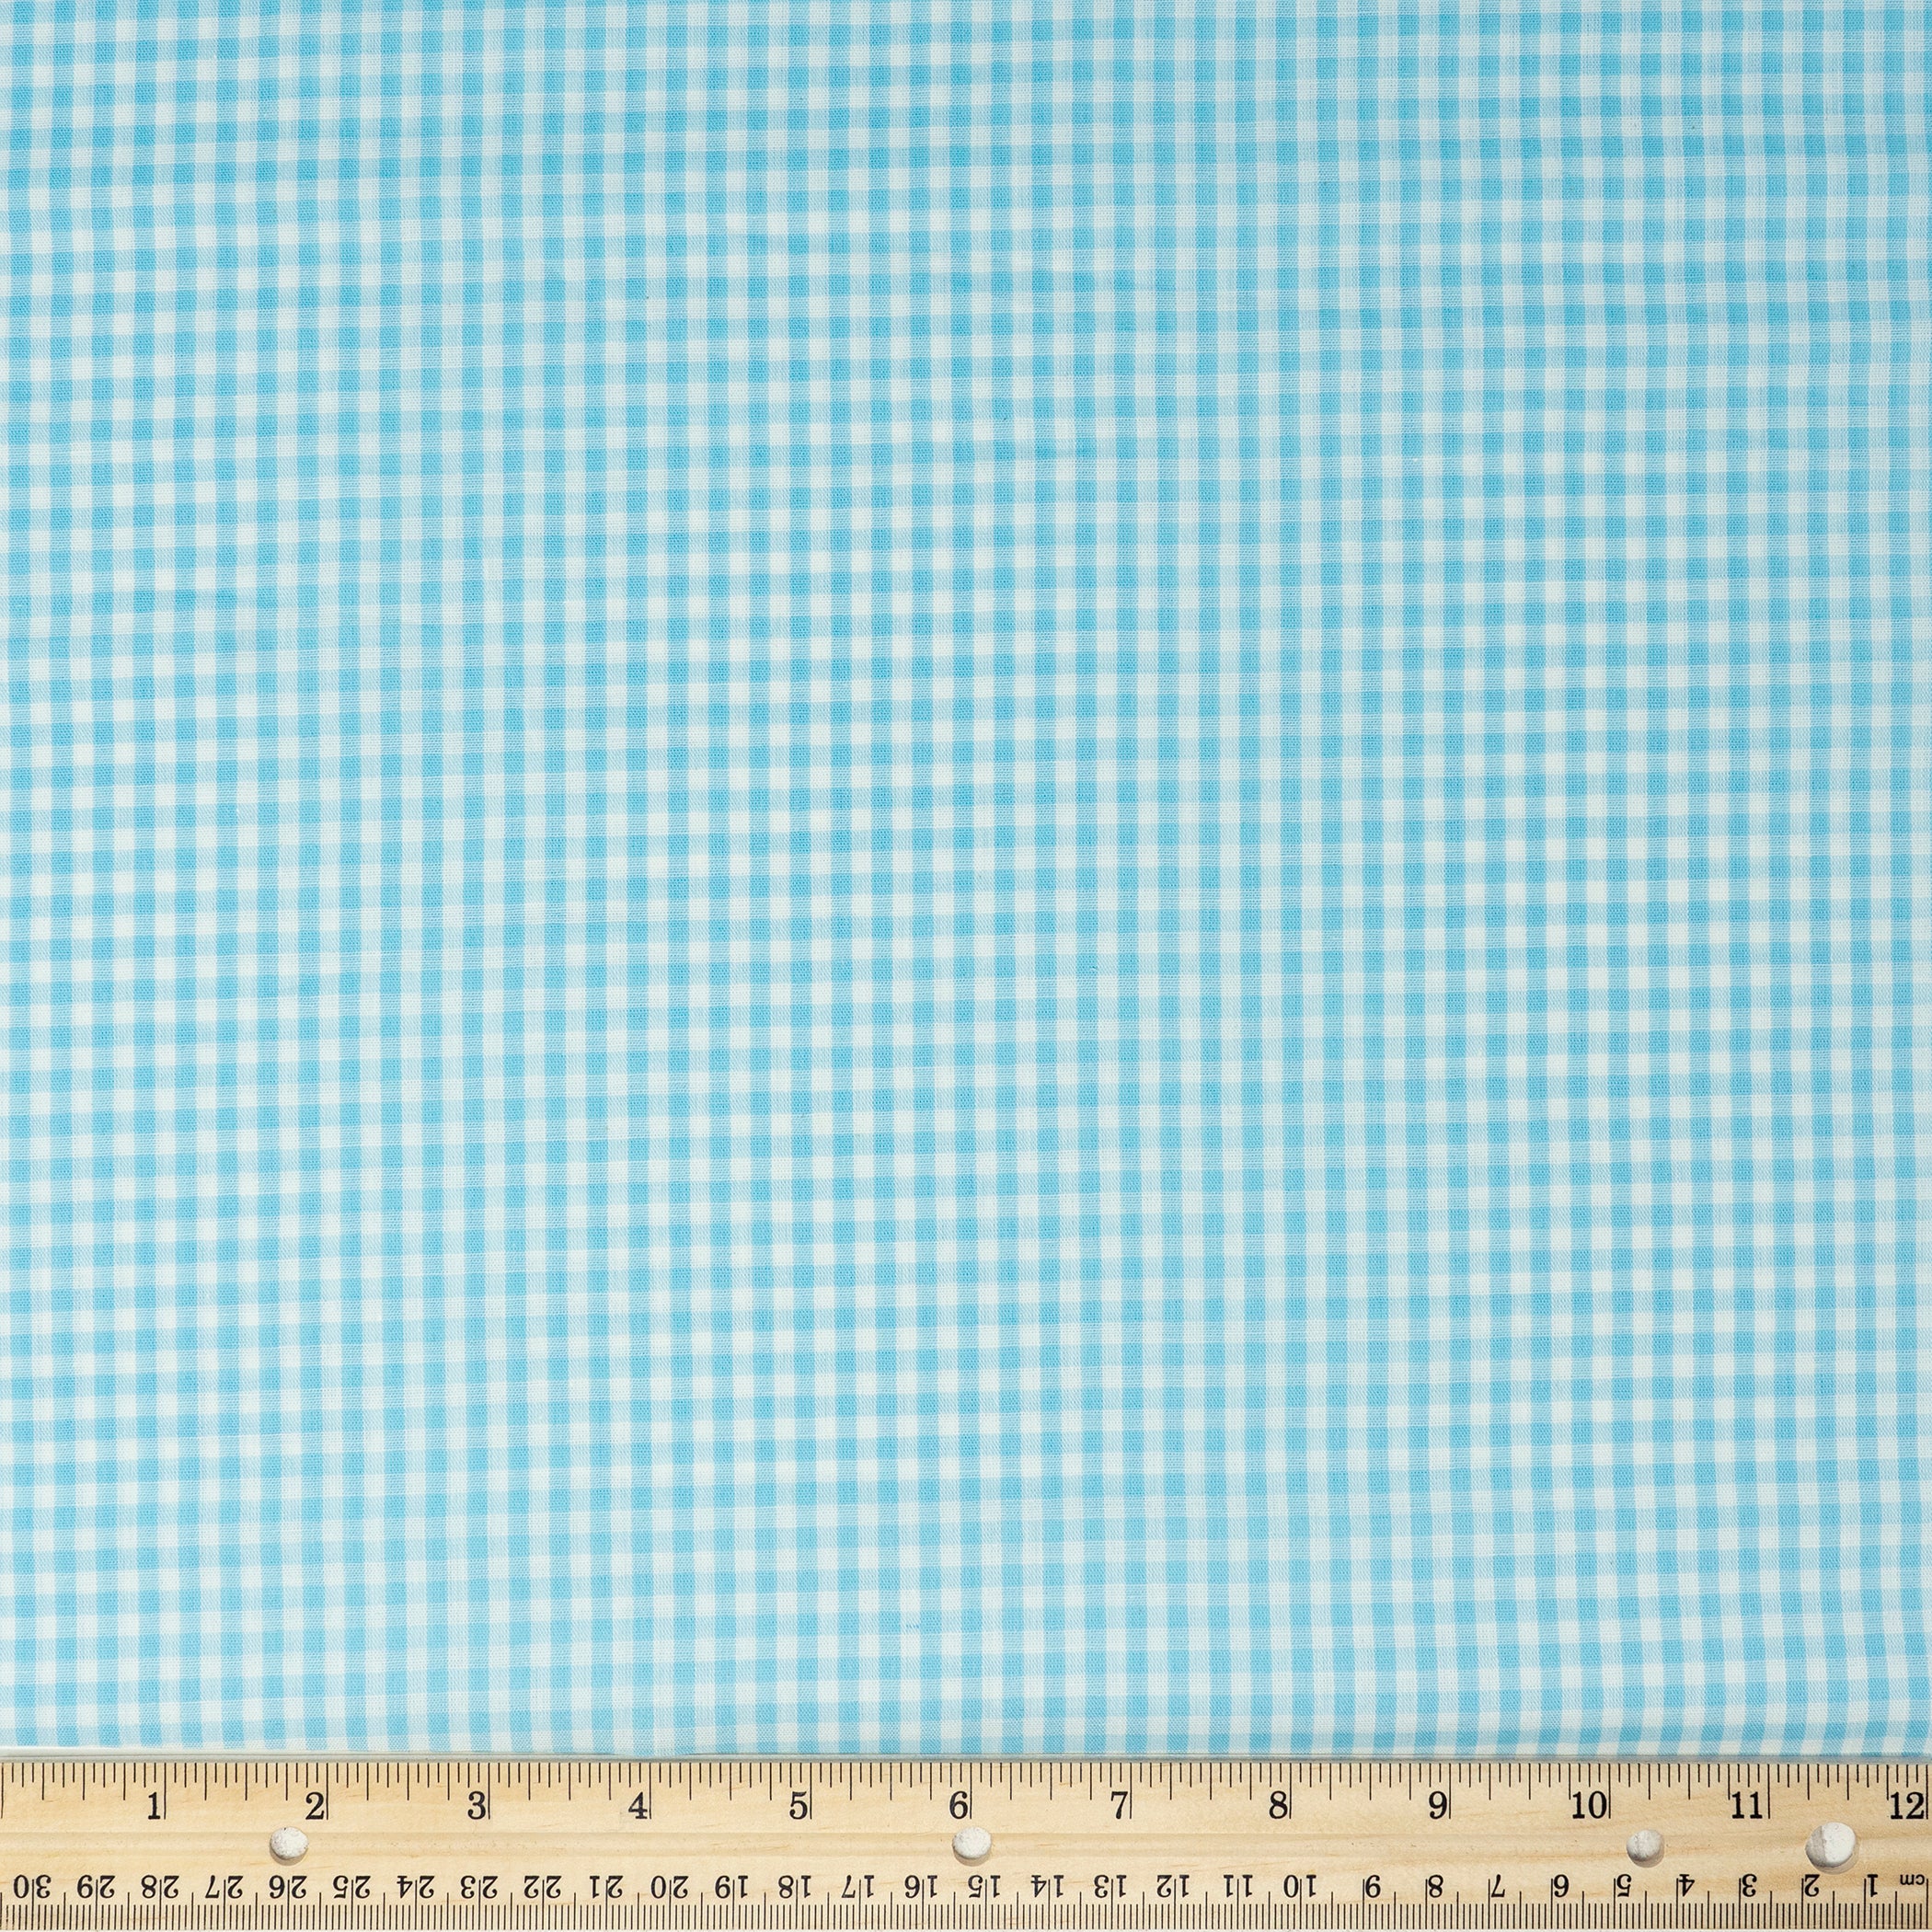 Waverly Inspirations Cotton 44" 1/8" Gingham Powder Blue Yarn Dye Color Sewing Fabric by the Yard